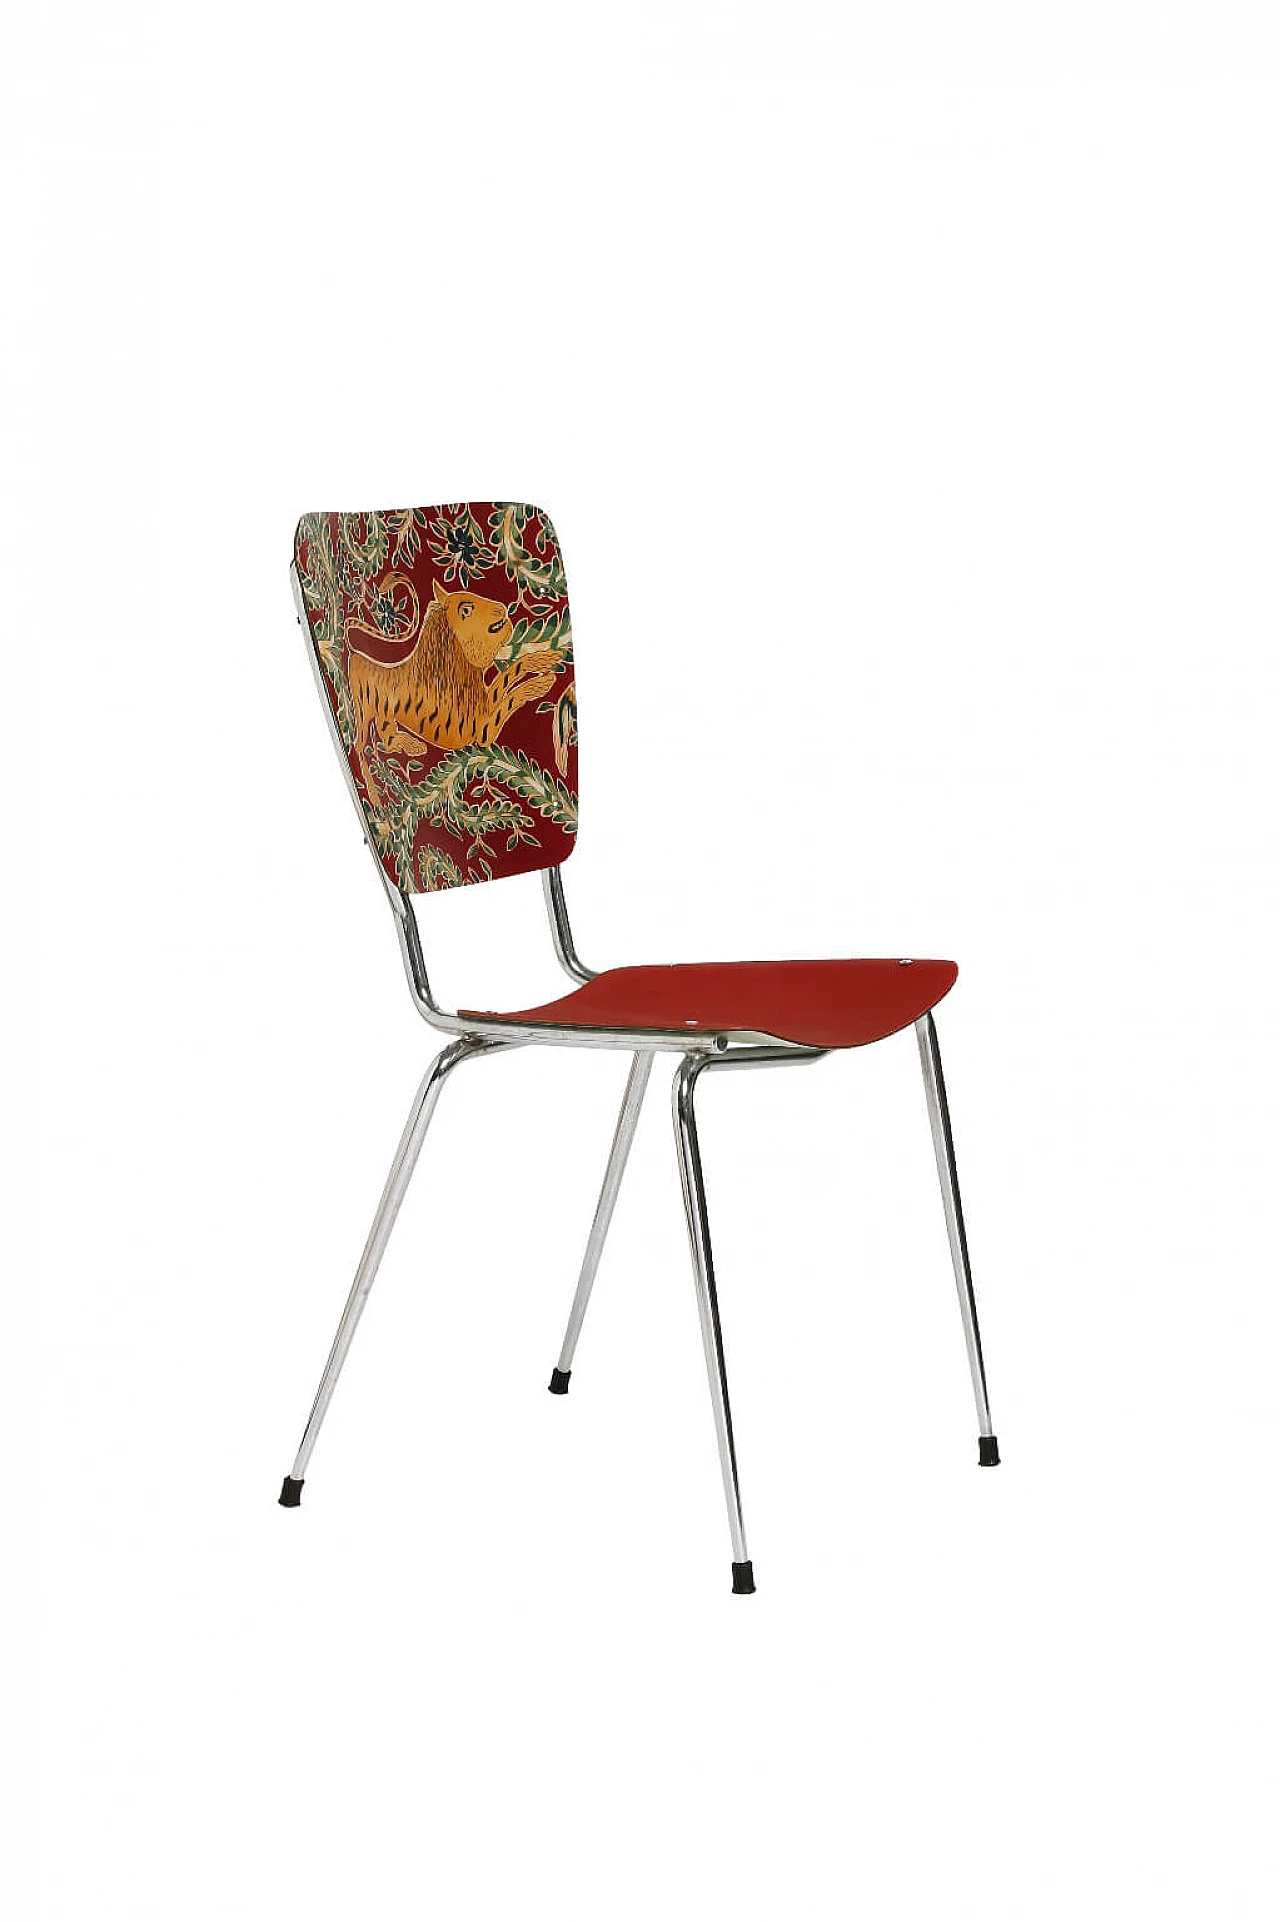 Laminated chair with resinated fabric, 1970s 1221005